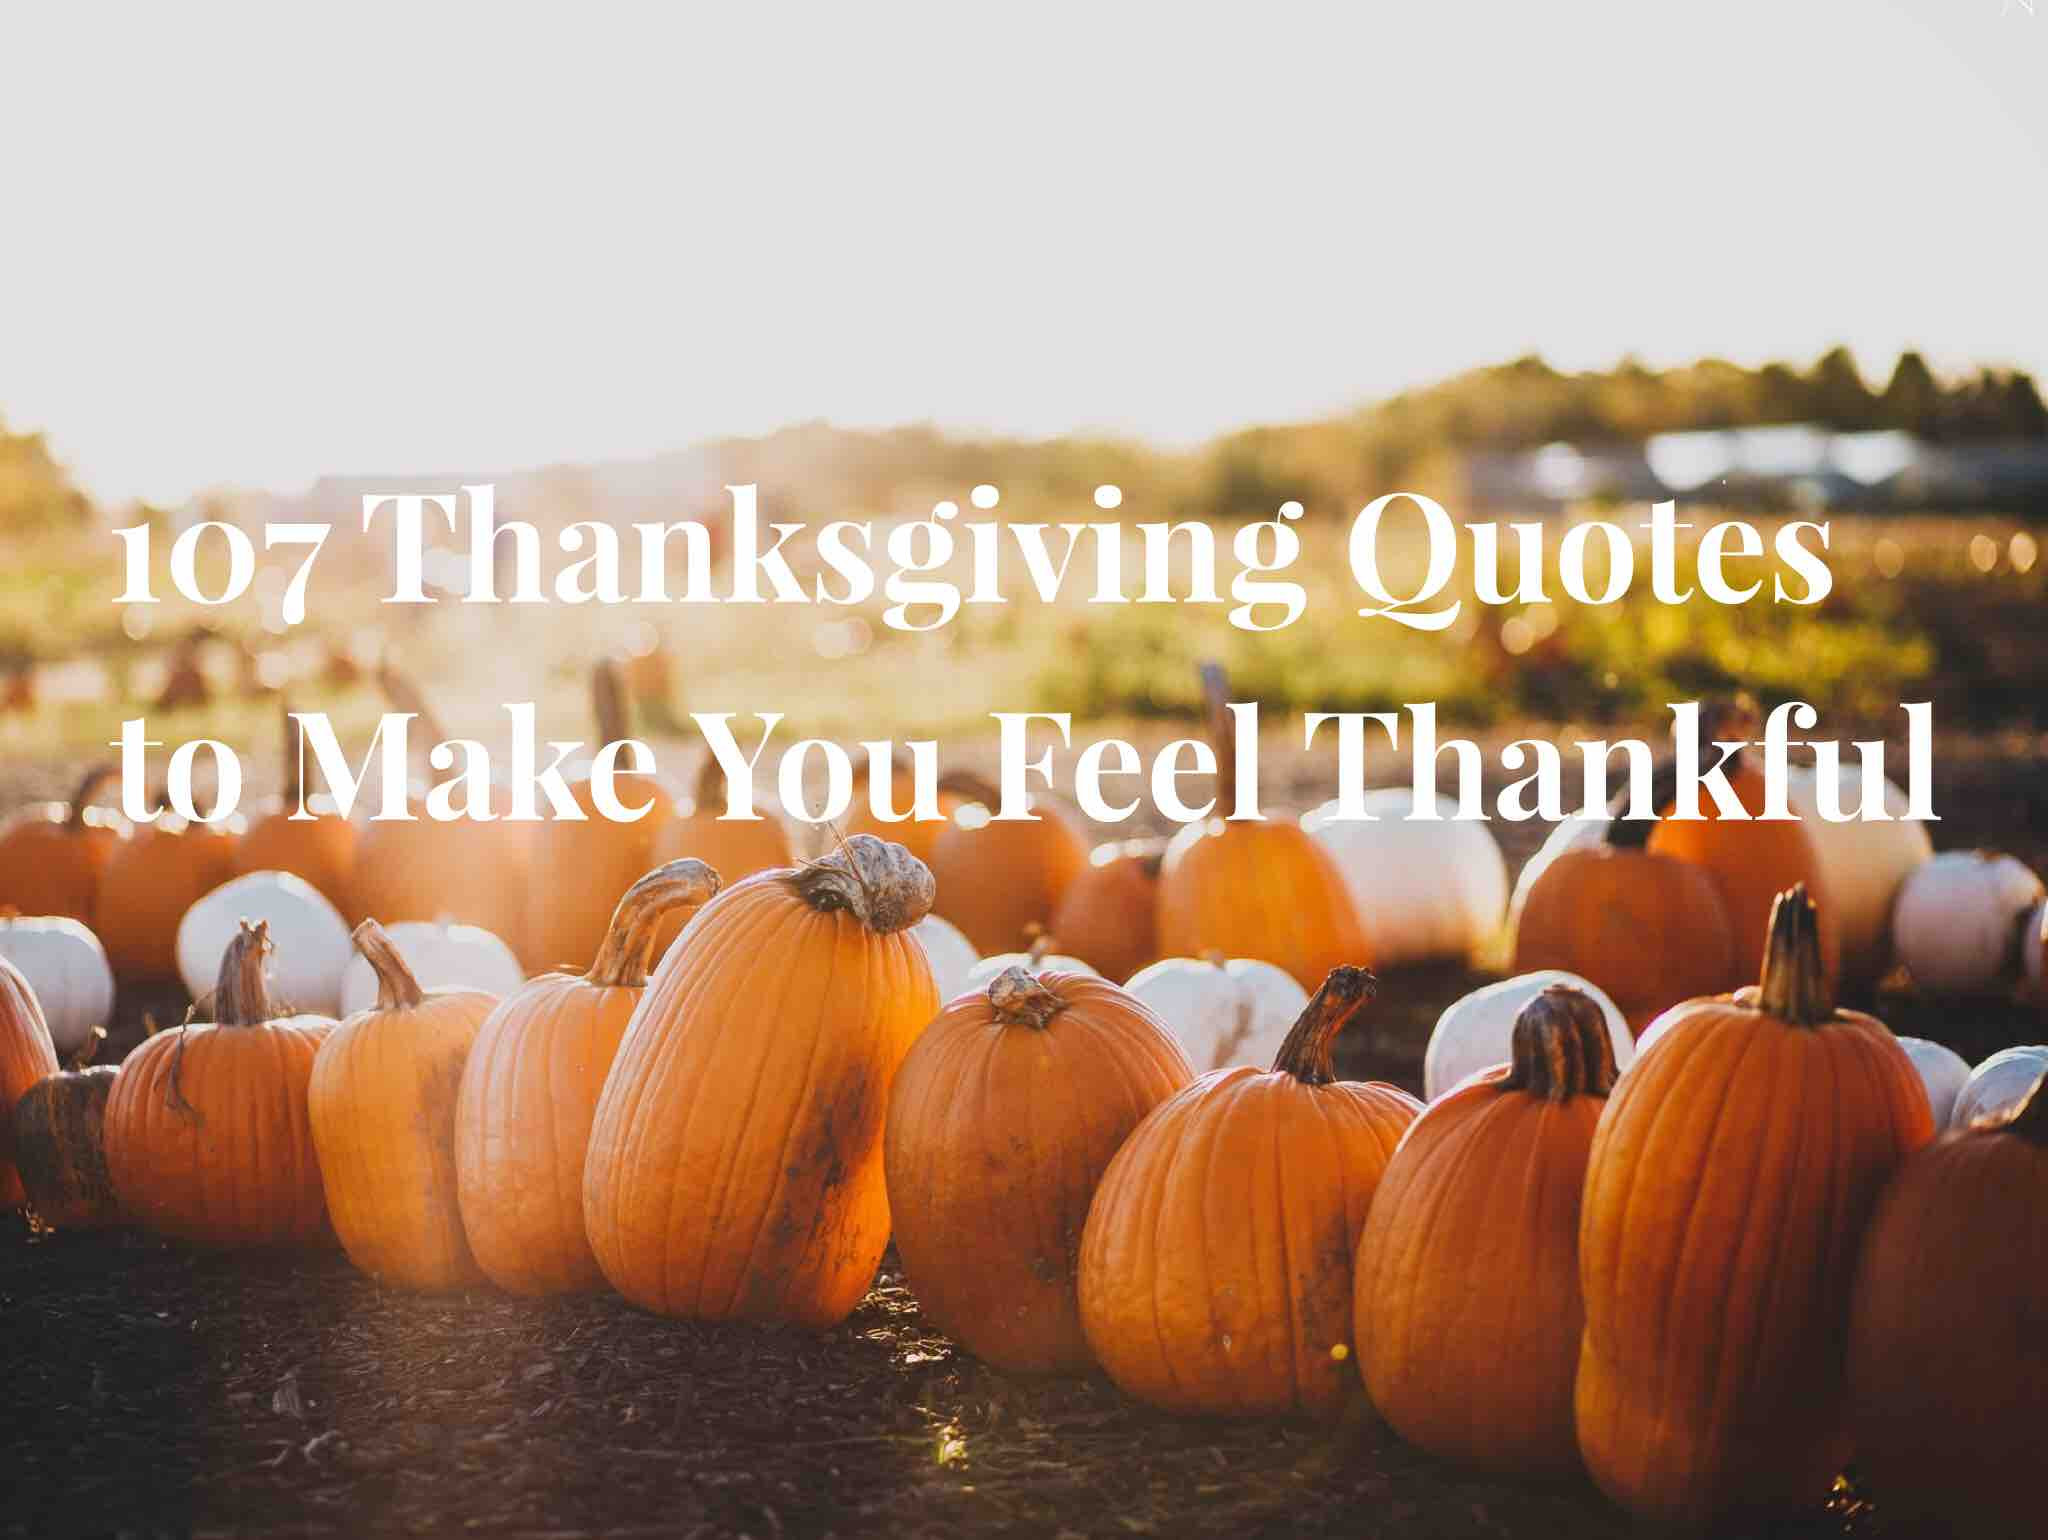 Thanksgiving Day Quotes Inspirational
 107 Thanksgiving Quotes to Make You Feel Thankful